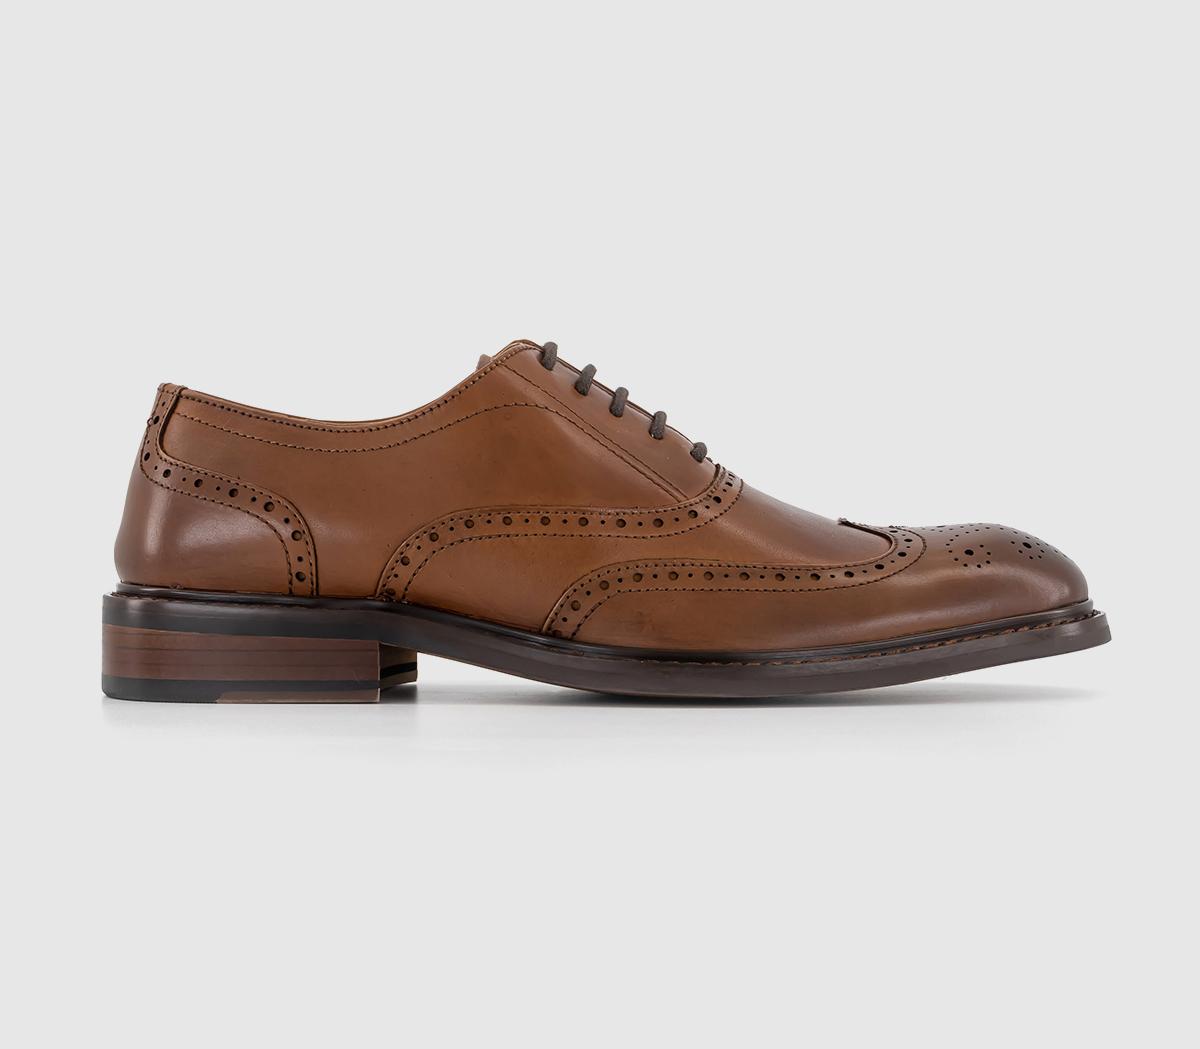 OFFICEMaxwell Oxford BroguesTan Leather